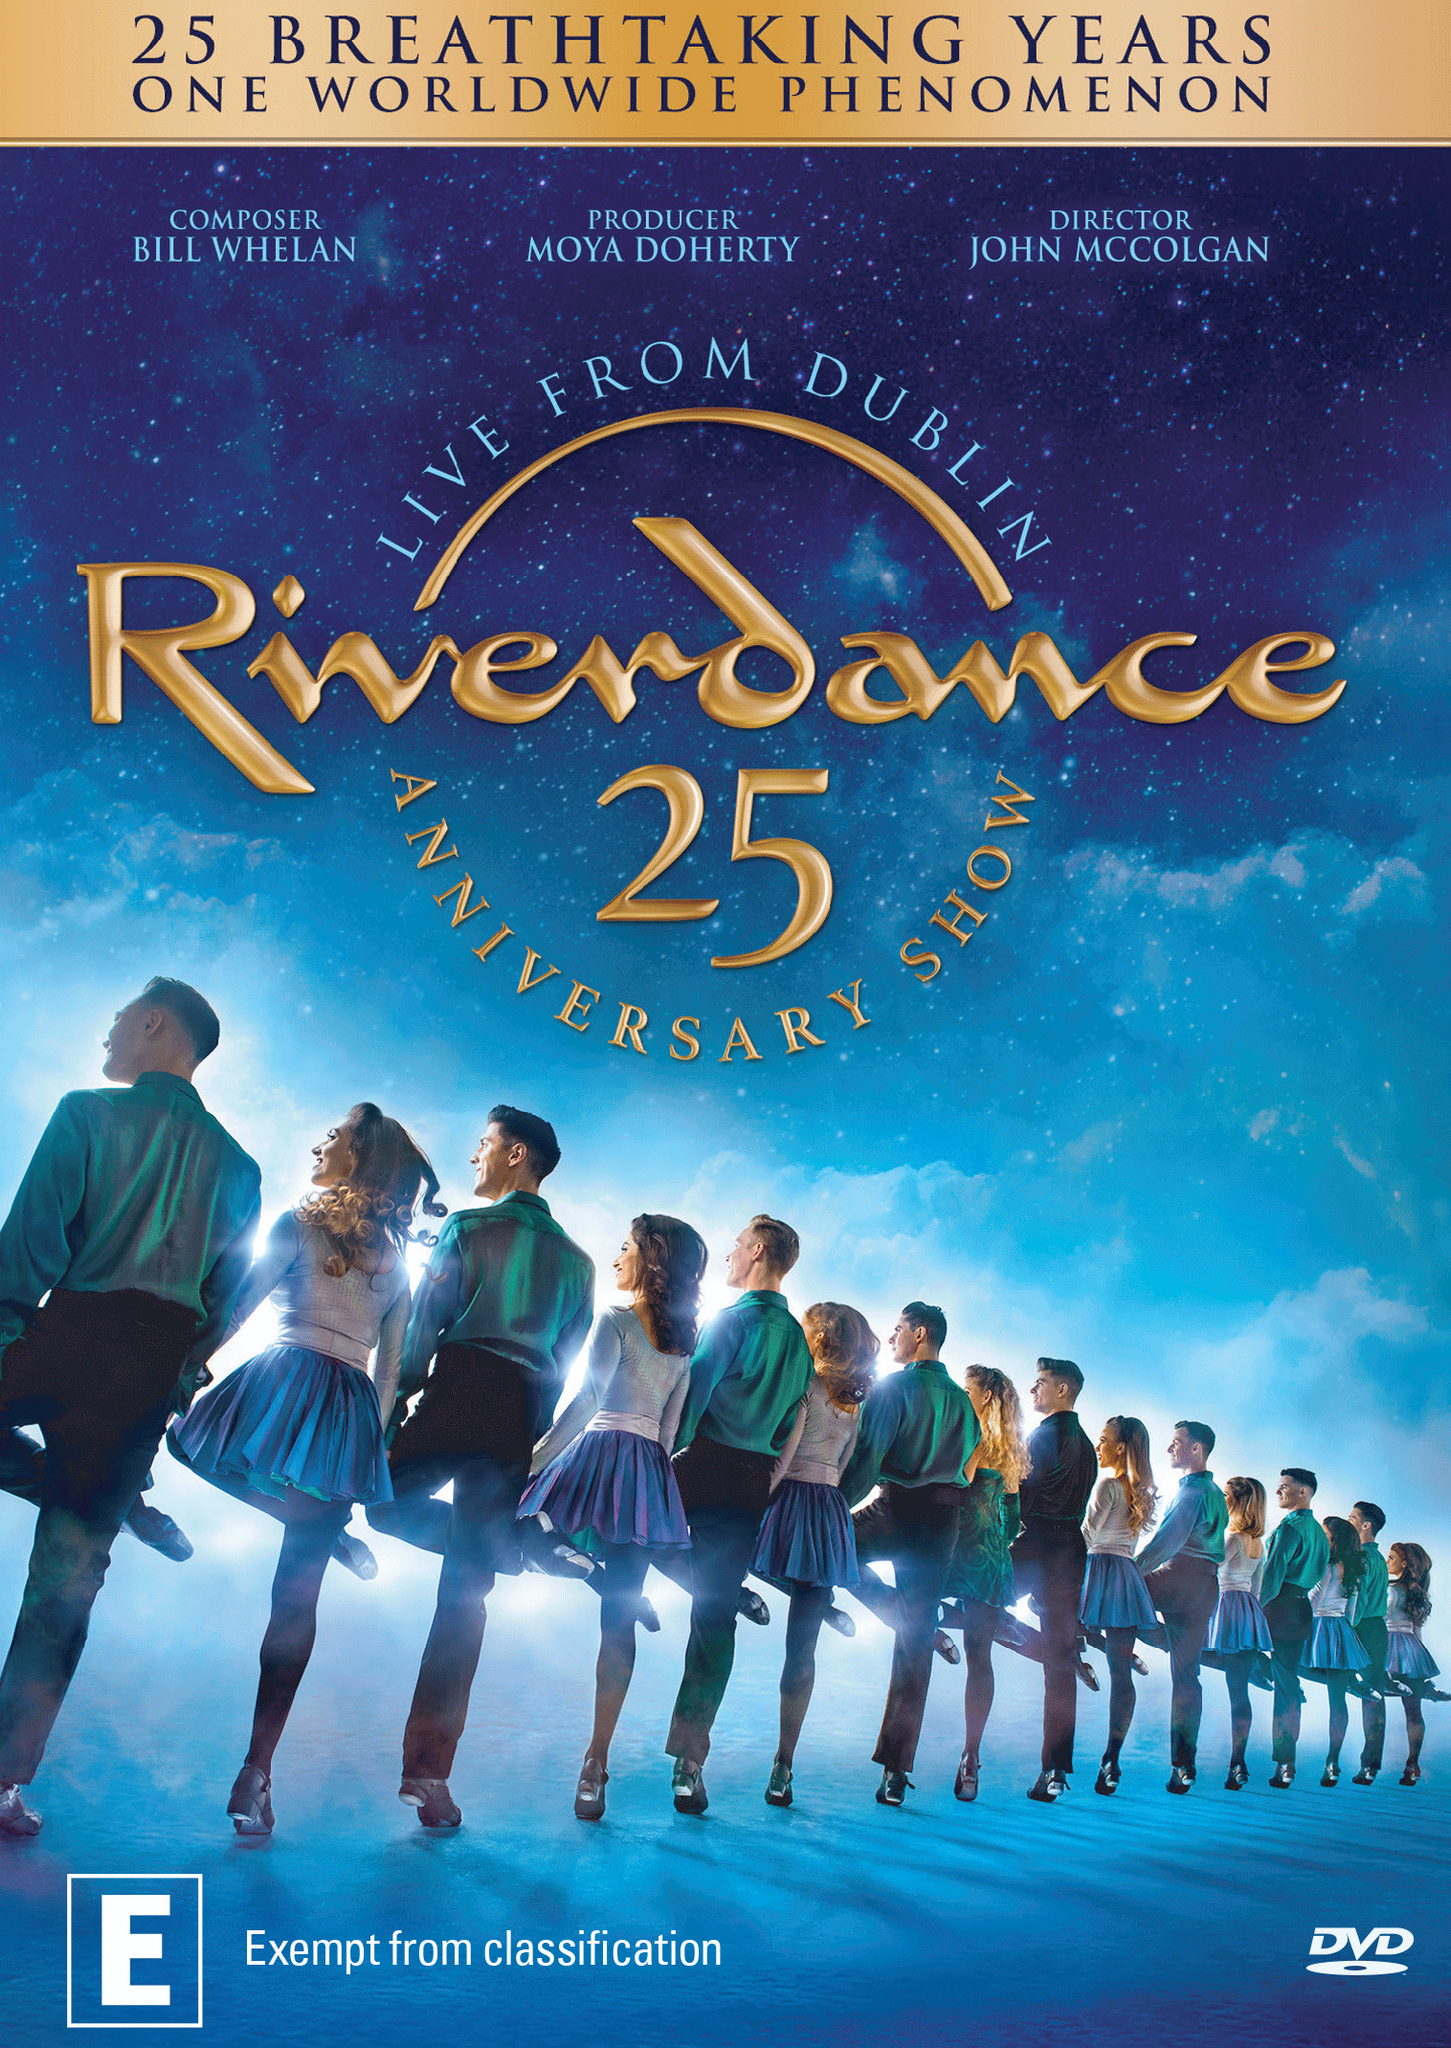 RIVERDANCE 25TH ANNIVERSARY SHOW: LIVE FROM DUBLIN - SPECIAL EDITION BLU-RAY